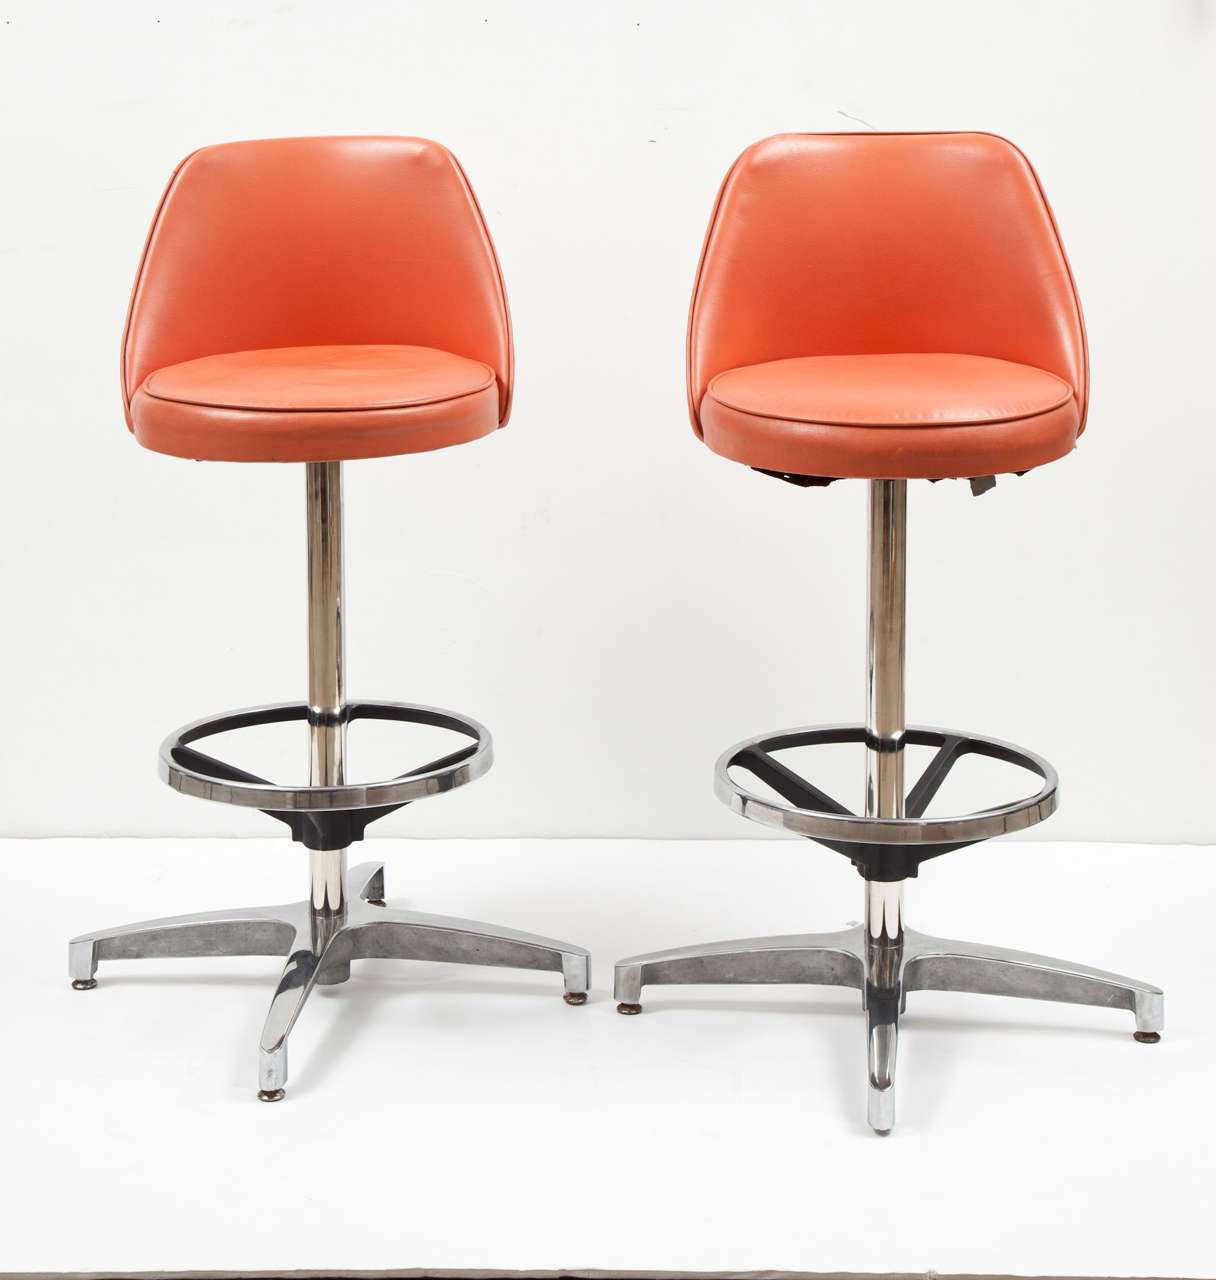 The base of each stool has been re-chromed.
The seat is in vinyl.
In vintage condition.
These are the authentic swivel stools from the 1960s.
Seat width is 18 inches